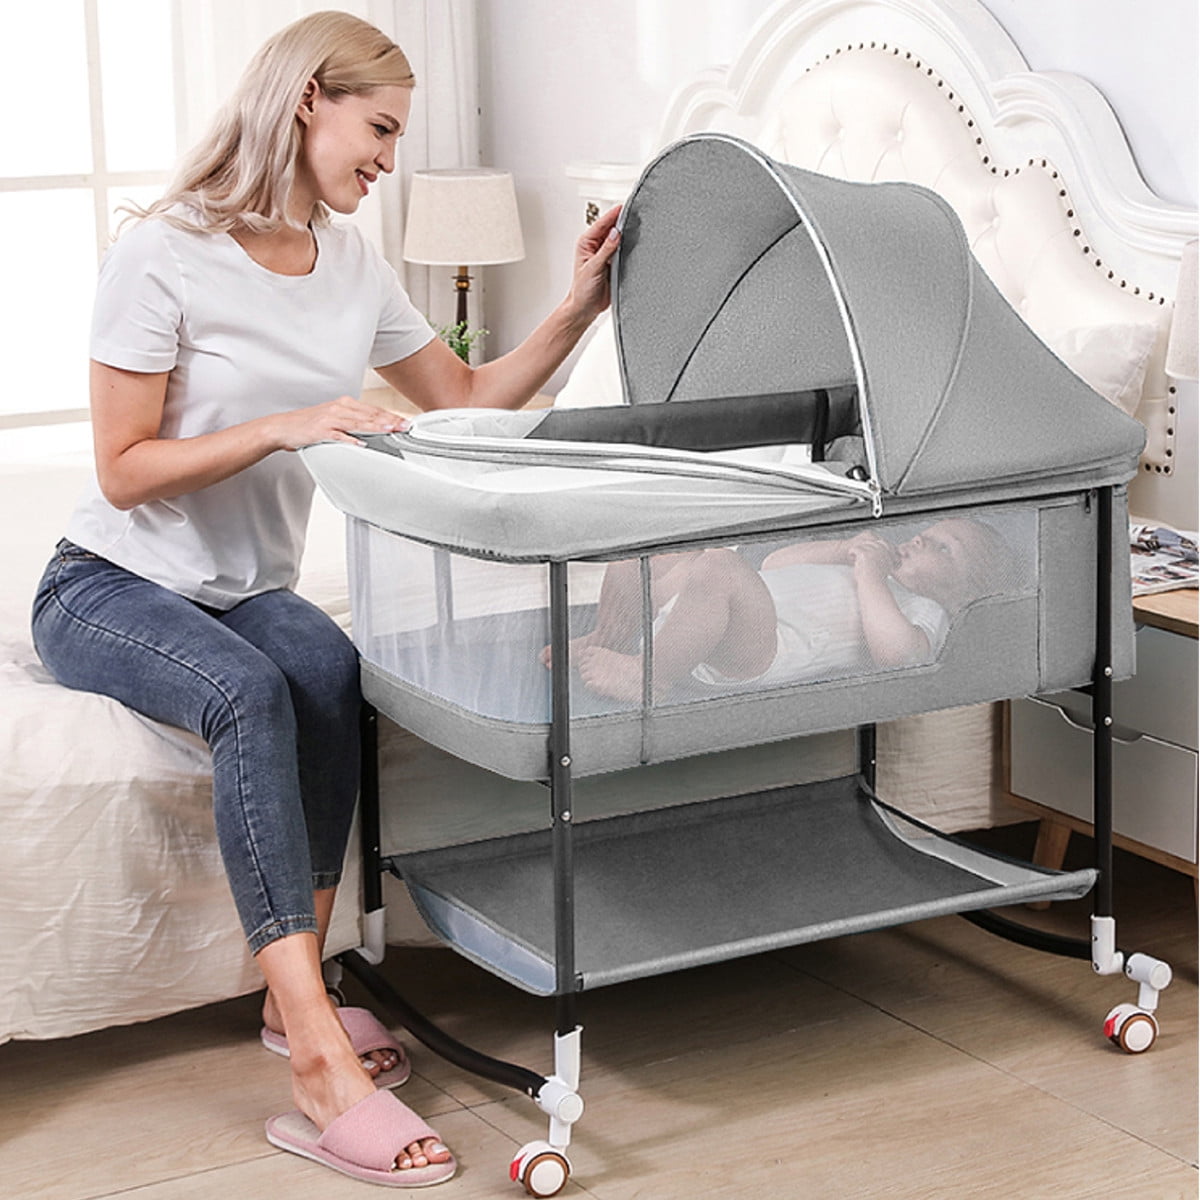 Adjustable Portable Bed for Infant/Baby Bedside Sleeper Ihoming Baby Bassinet 2 in 1 Travel Crib Baby Bed with Breathable Net 